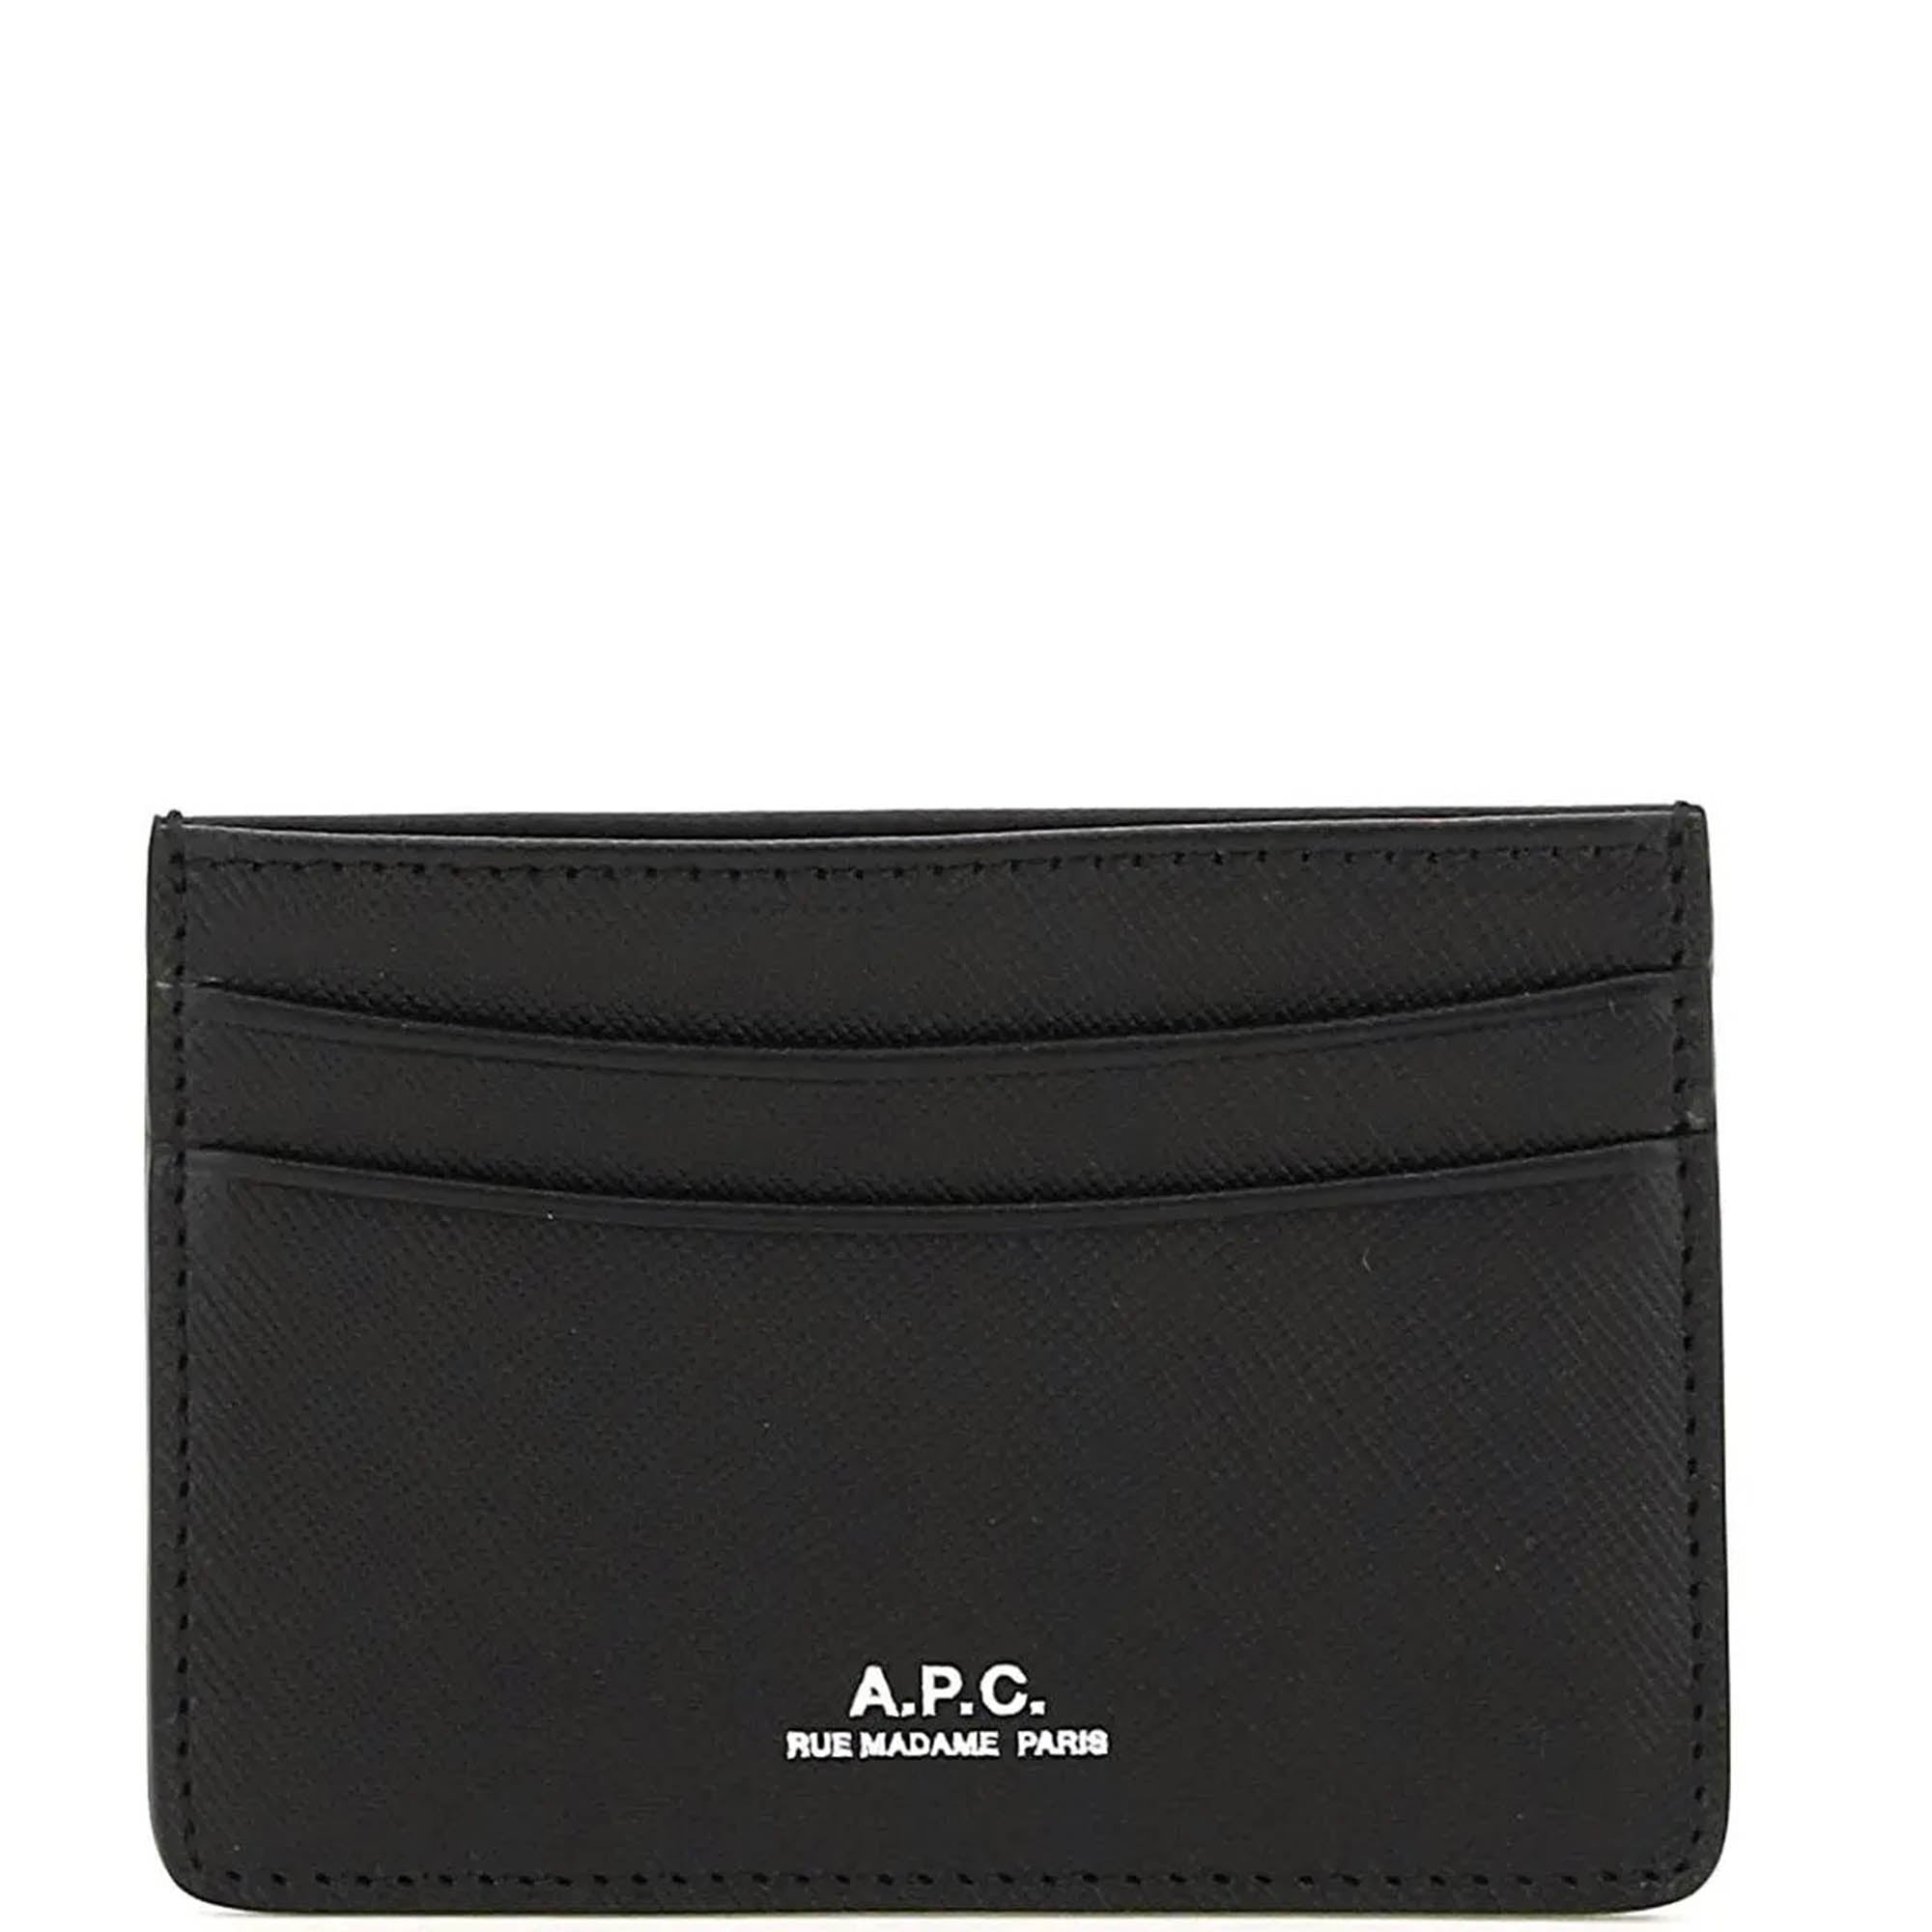 A.P.C Card Holder in Black ONE Size